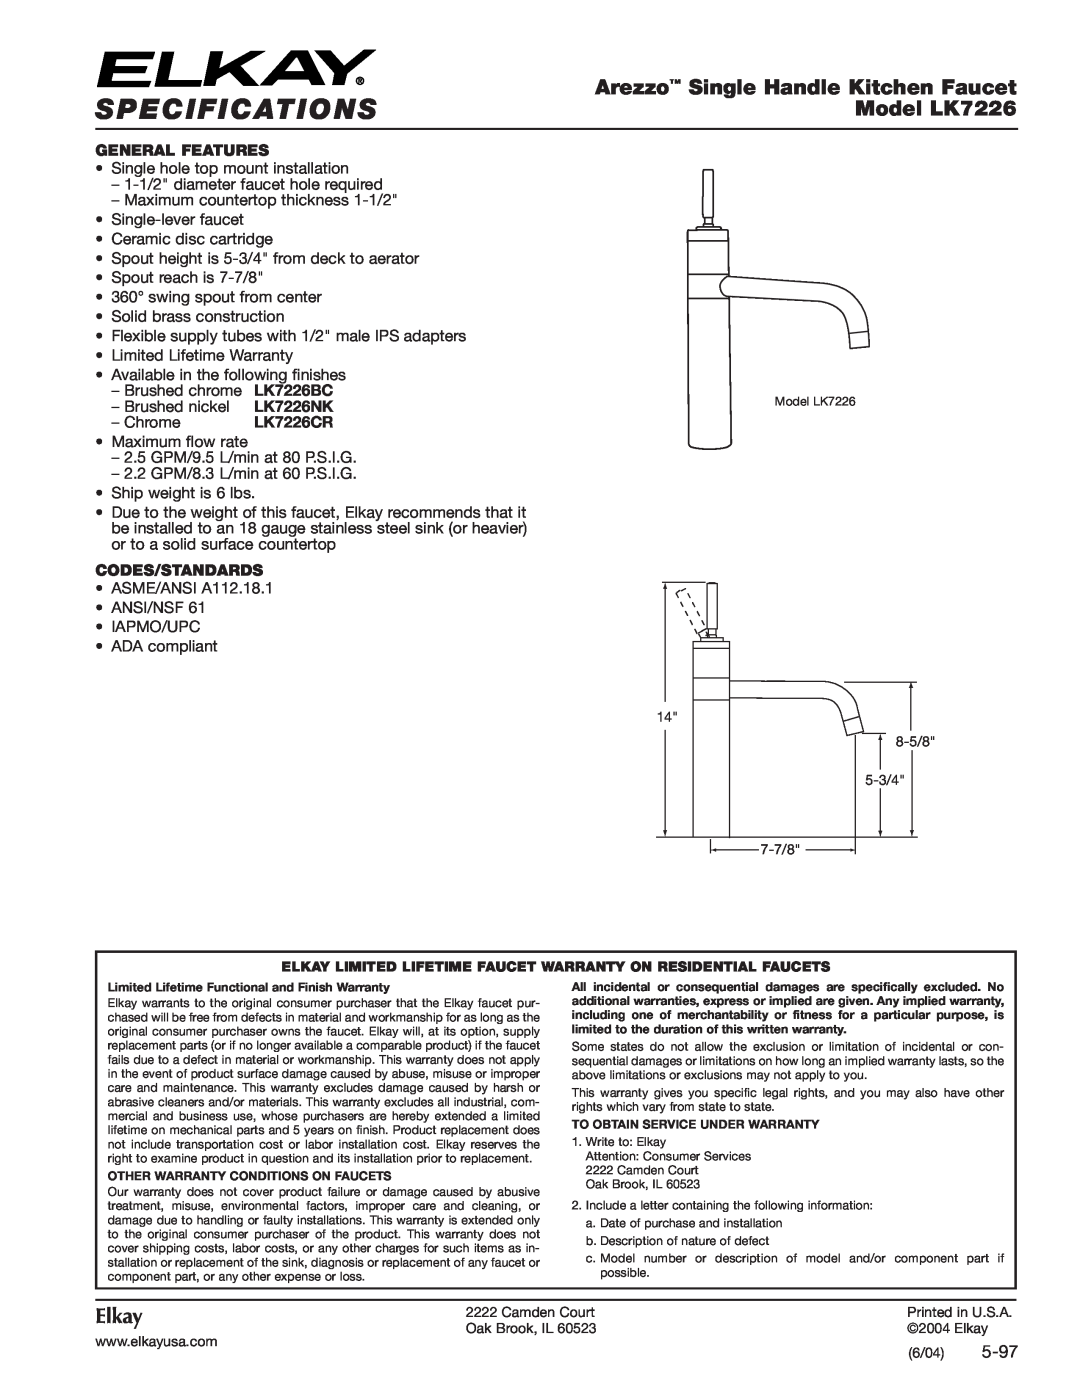 Elkay specifications Specifications, Arezzo Single Handle Kitchen Faucet, Model LK7226, Elkay, 5-97, General Features 